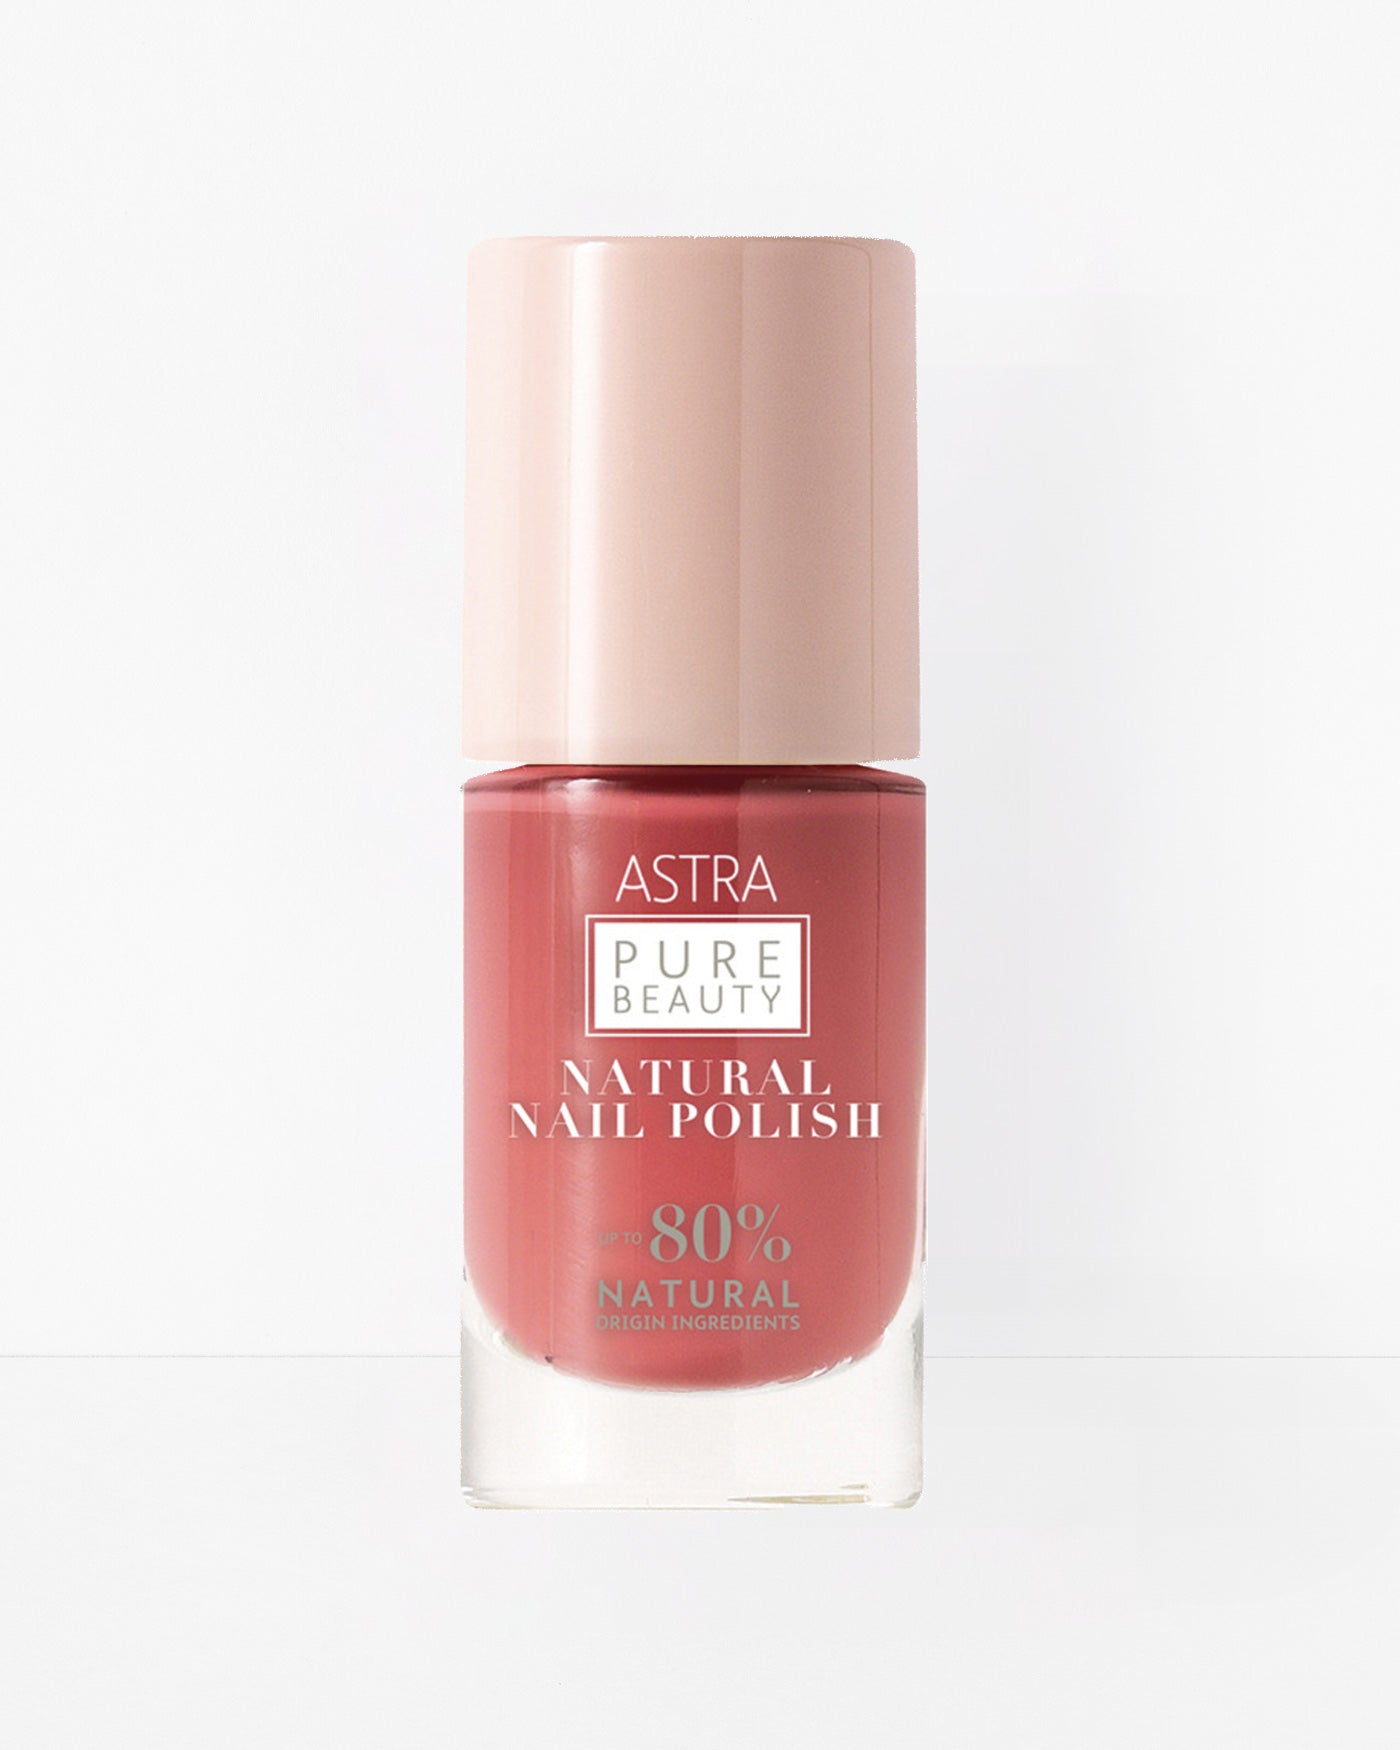 PURE BEAUTY NAIL POLISH - Smalto Unghie Naturale - 09 - Ibiscus - Astra Make-Up